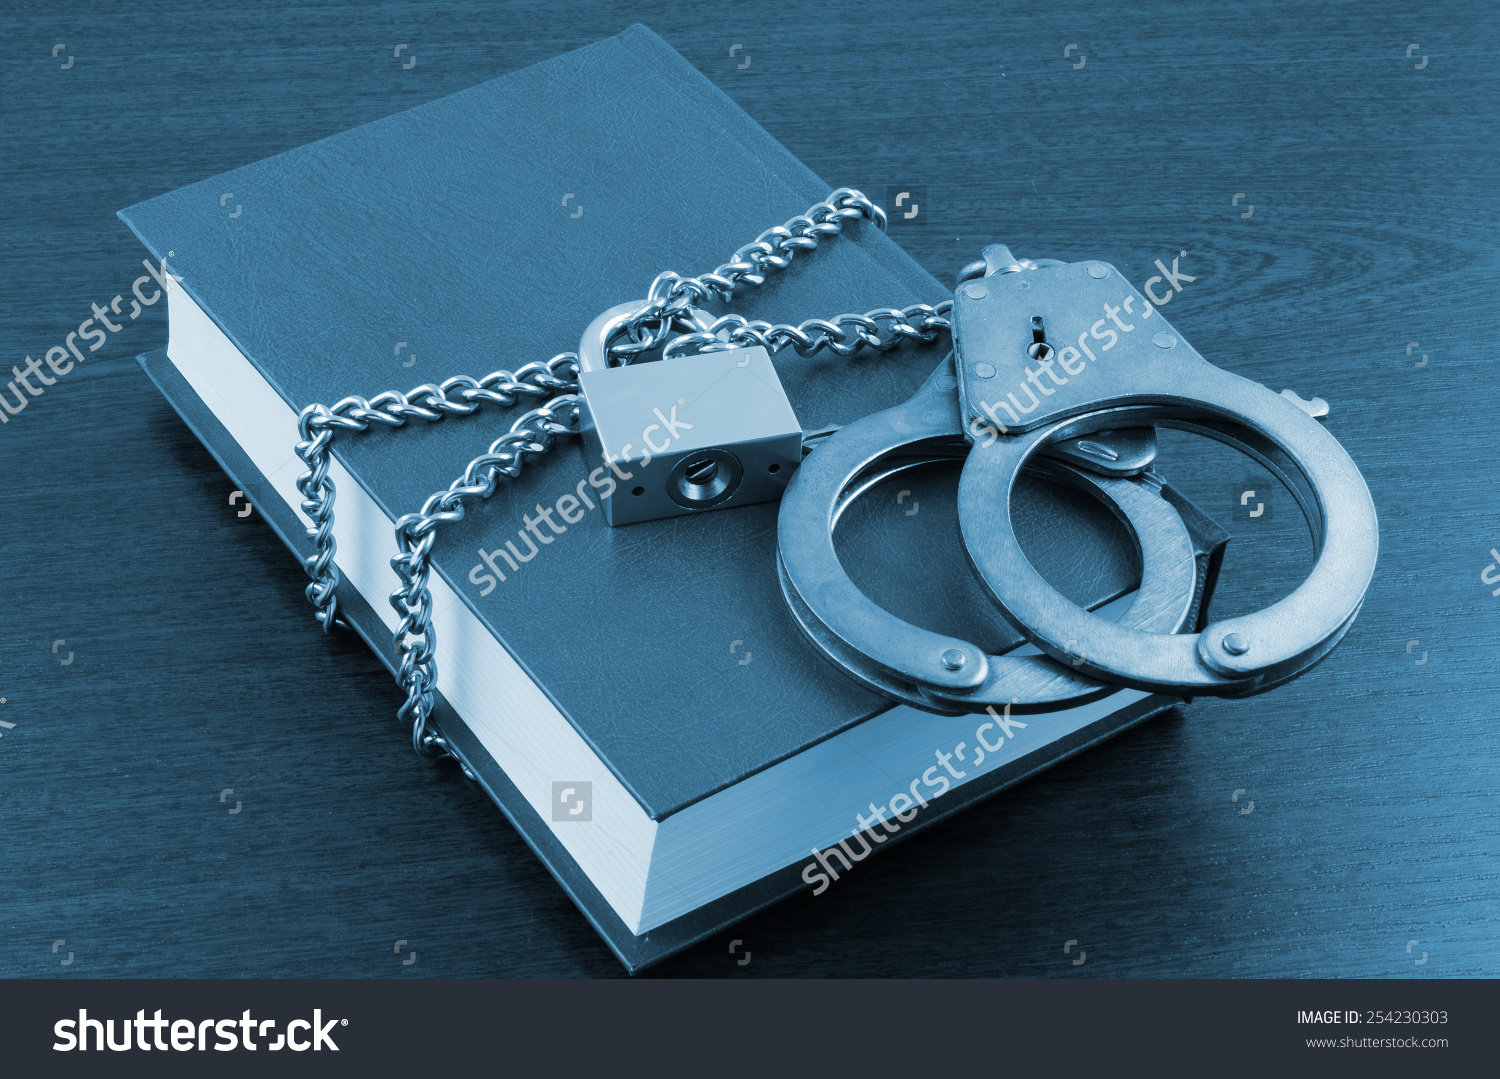 stock-photo-information-security-concept-handcuffs-book-with-chain-and-padlock-254230303